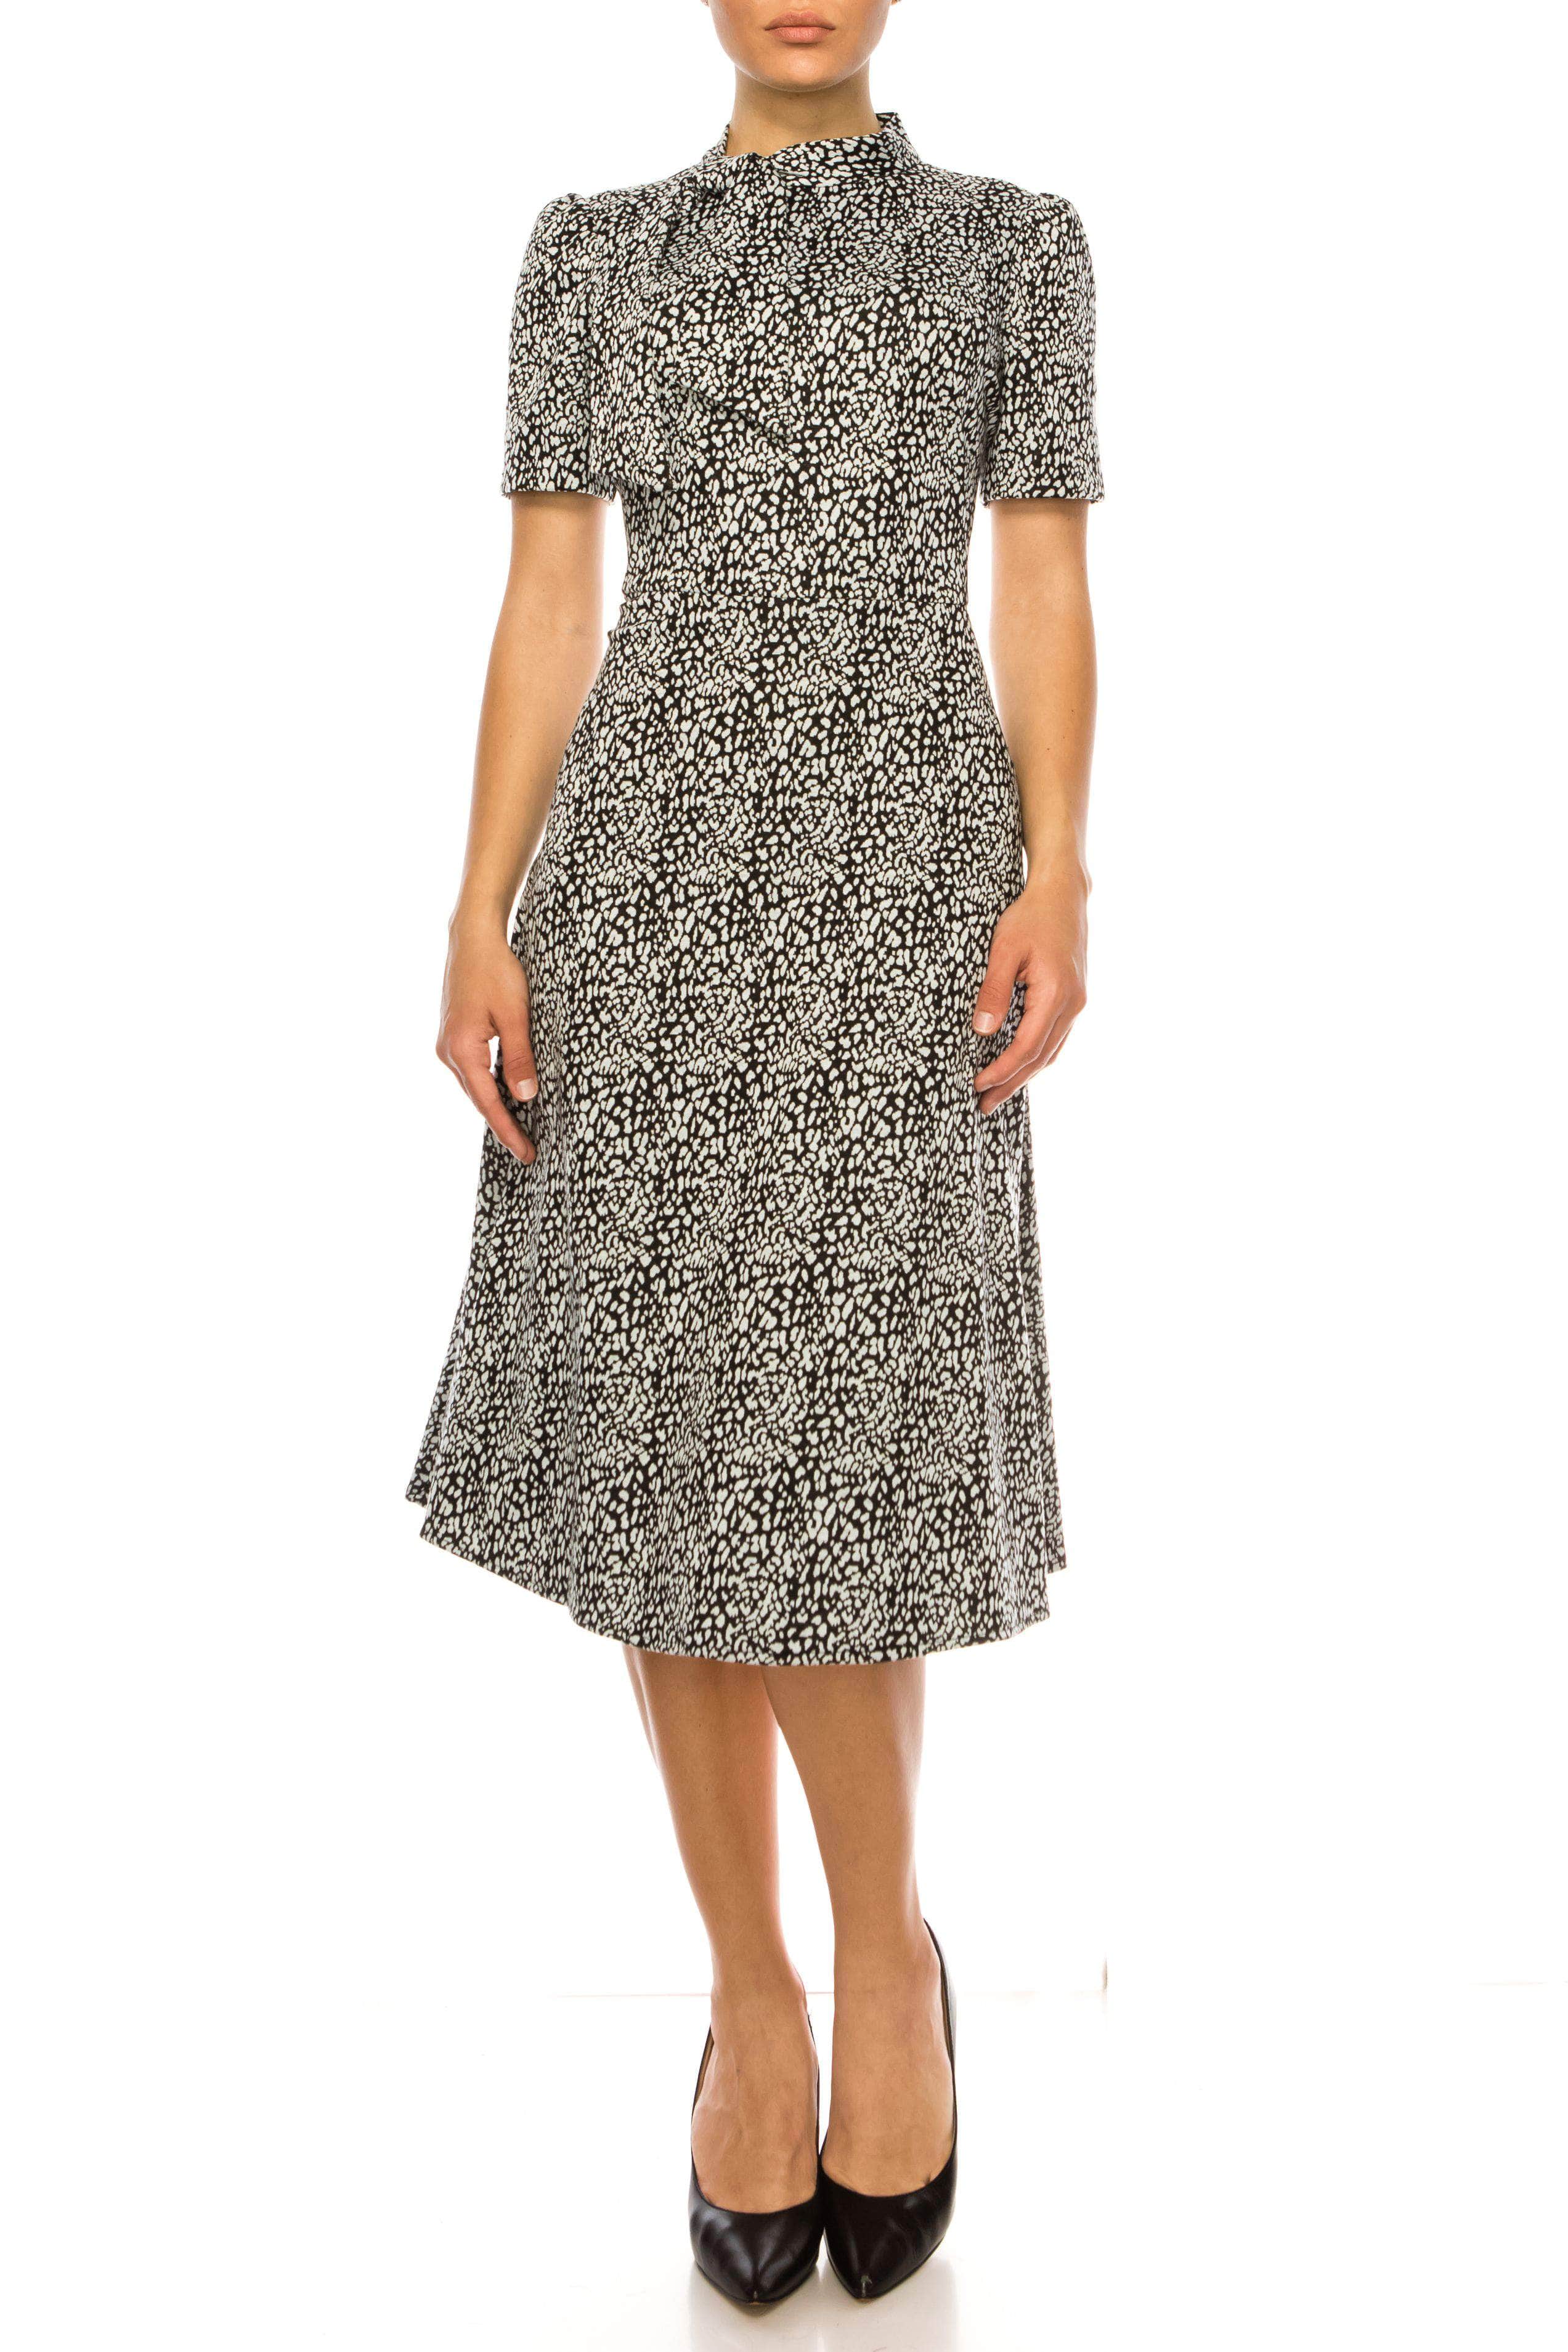 Image of Maggy London GT506M - Printed Short Sleeve Formal Dress